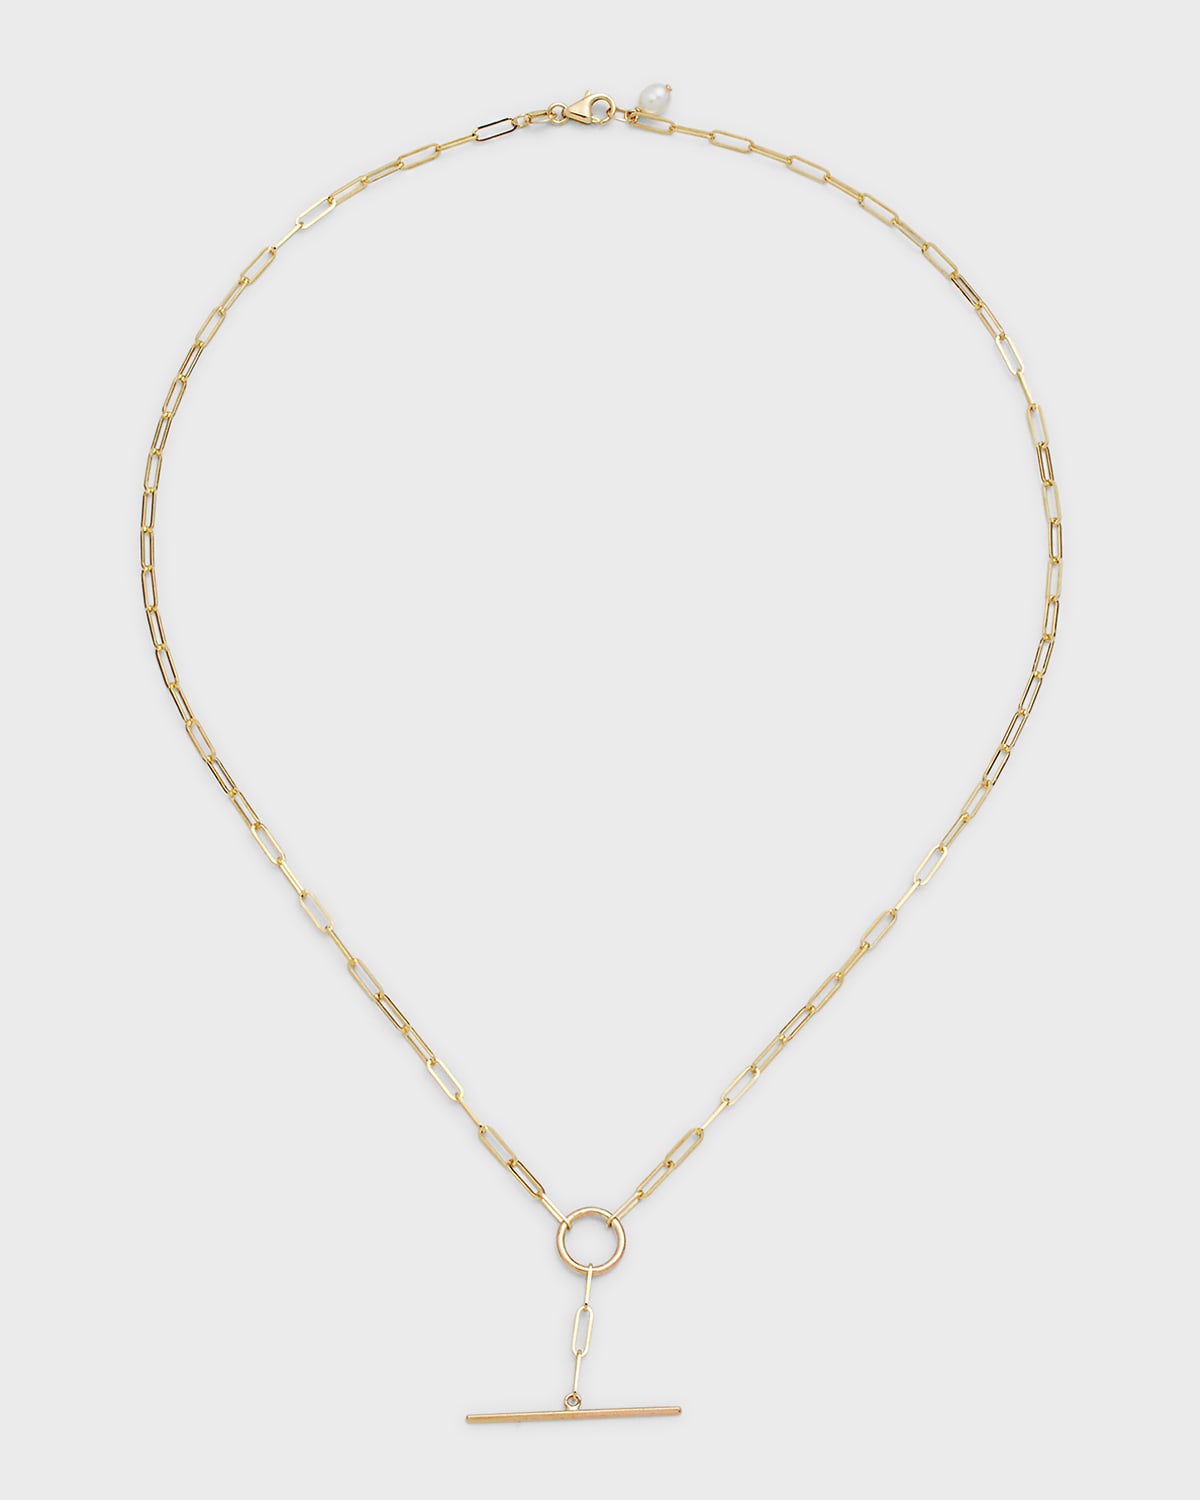 POPPY FINCH 14K YELLOW GOLD TOGGLE LINK NECKLACE